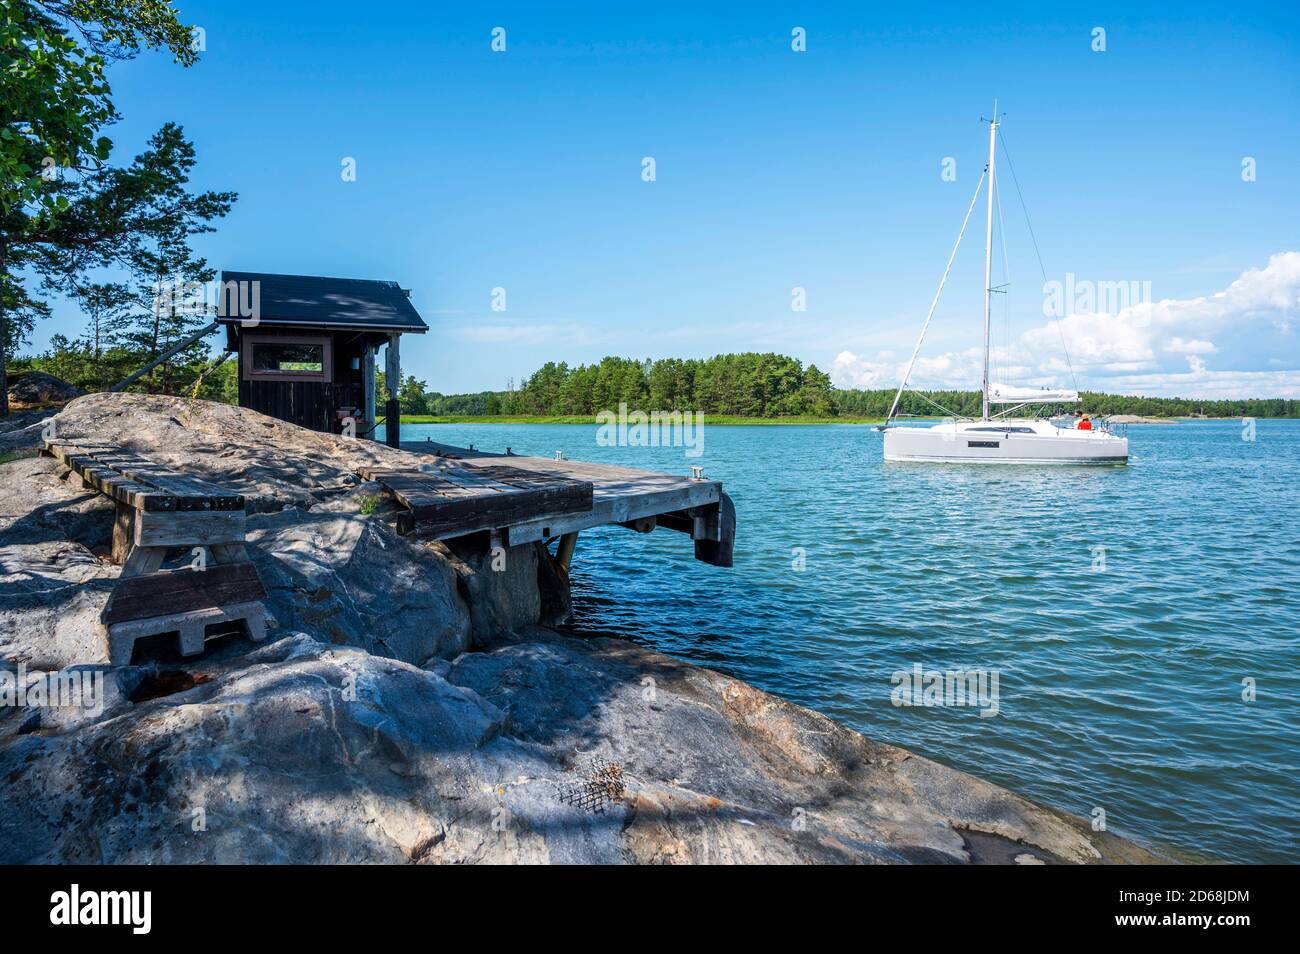 Landscape of the region of Southwest Finland where there are thousands of islands, at the crossing of the Gulf of Finland and the Gulf of Bothnia. Arc Stock Photo